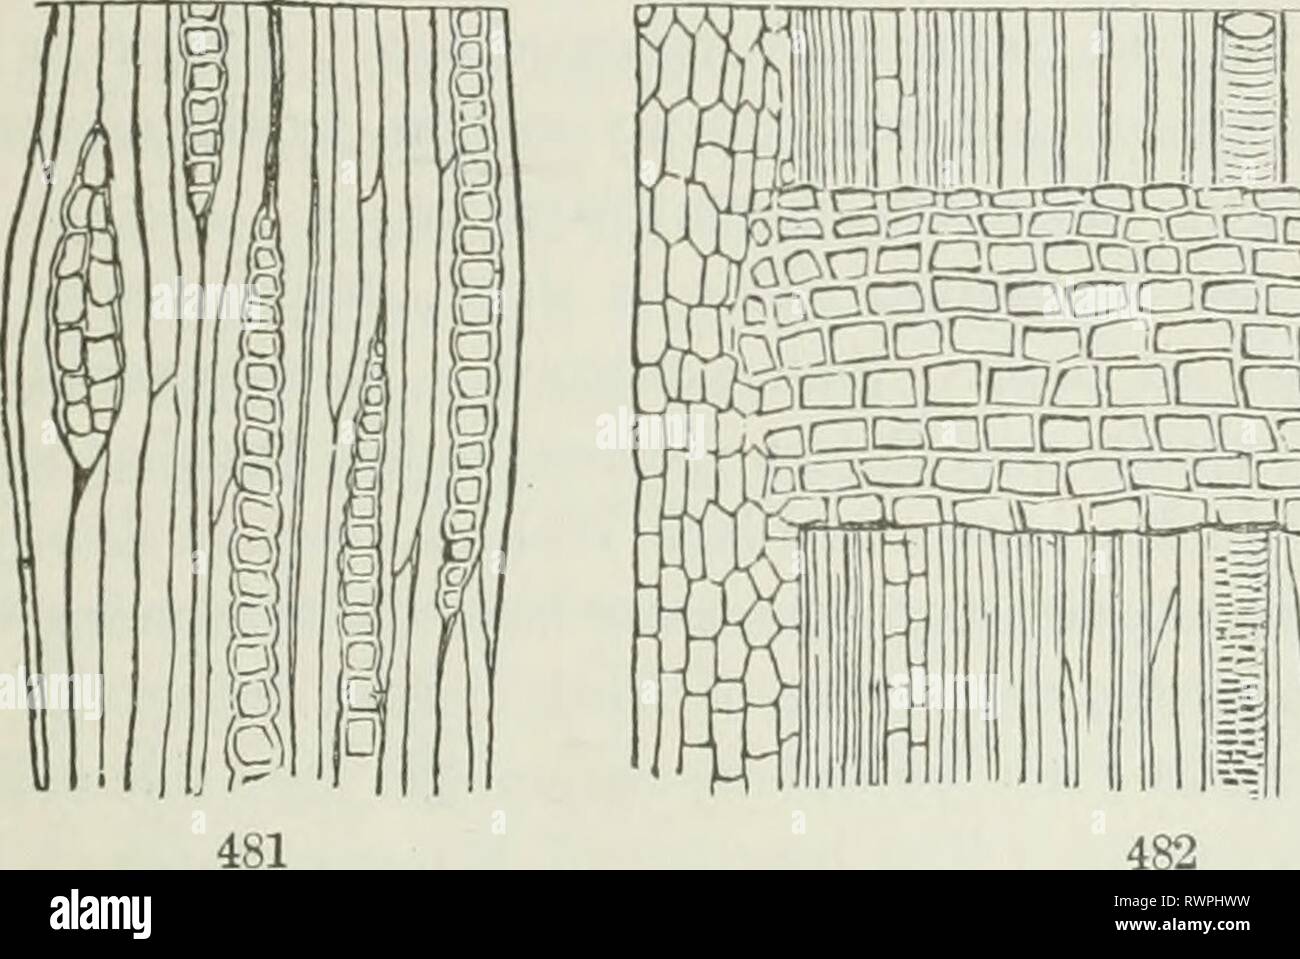 The elements of botany for The elements of botany for beginners and for schools elementsbotany00gray Year: 1887  SECTION If).] ANATOMY OF STEMS. 141 2. The Guicen Bark or Middle Bark. This cousists of cellalar tissue only, and contains the same green matter {chlorophyll, 417) as the leaves. In woody stems, before the season's growth is completed, it becomes cov- ered by 3. The Corky Layer or Outer Bark, tlie cells of which contain no chlorophyll, and are of the nature of cork. Common cork is the thick corky layer of the bark of the Cork-Oak of Spain. It is this which gives to the stems or twig Stock Photo